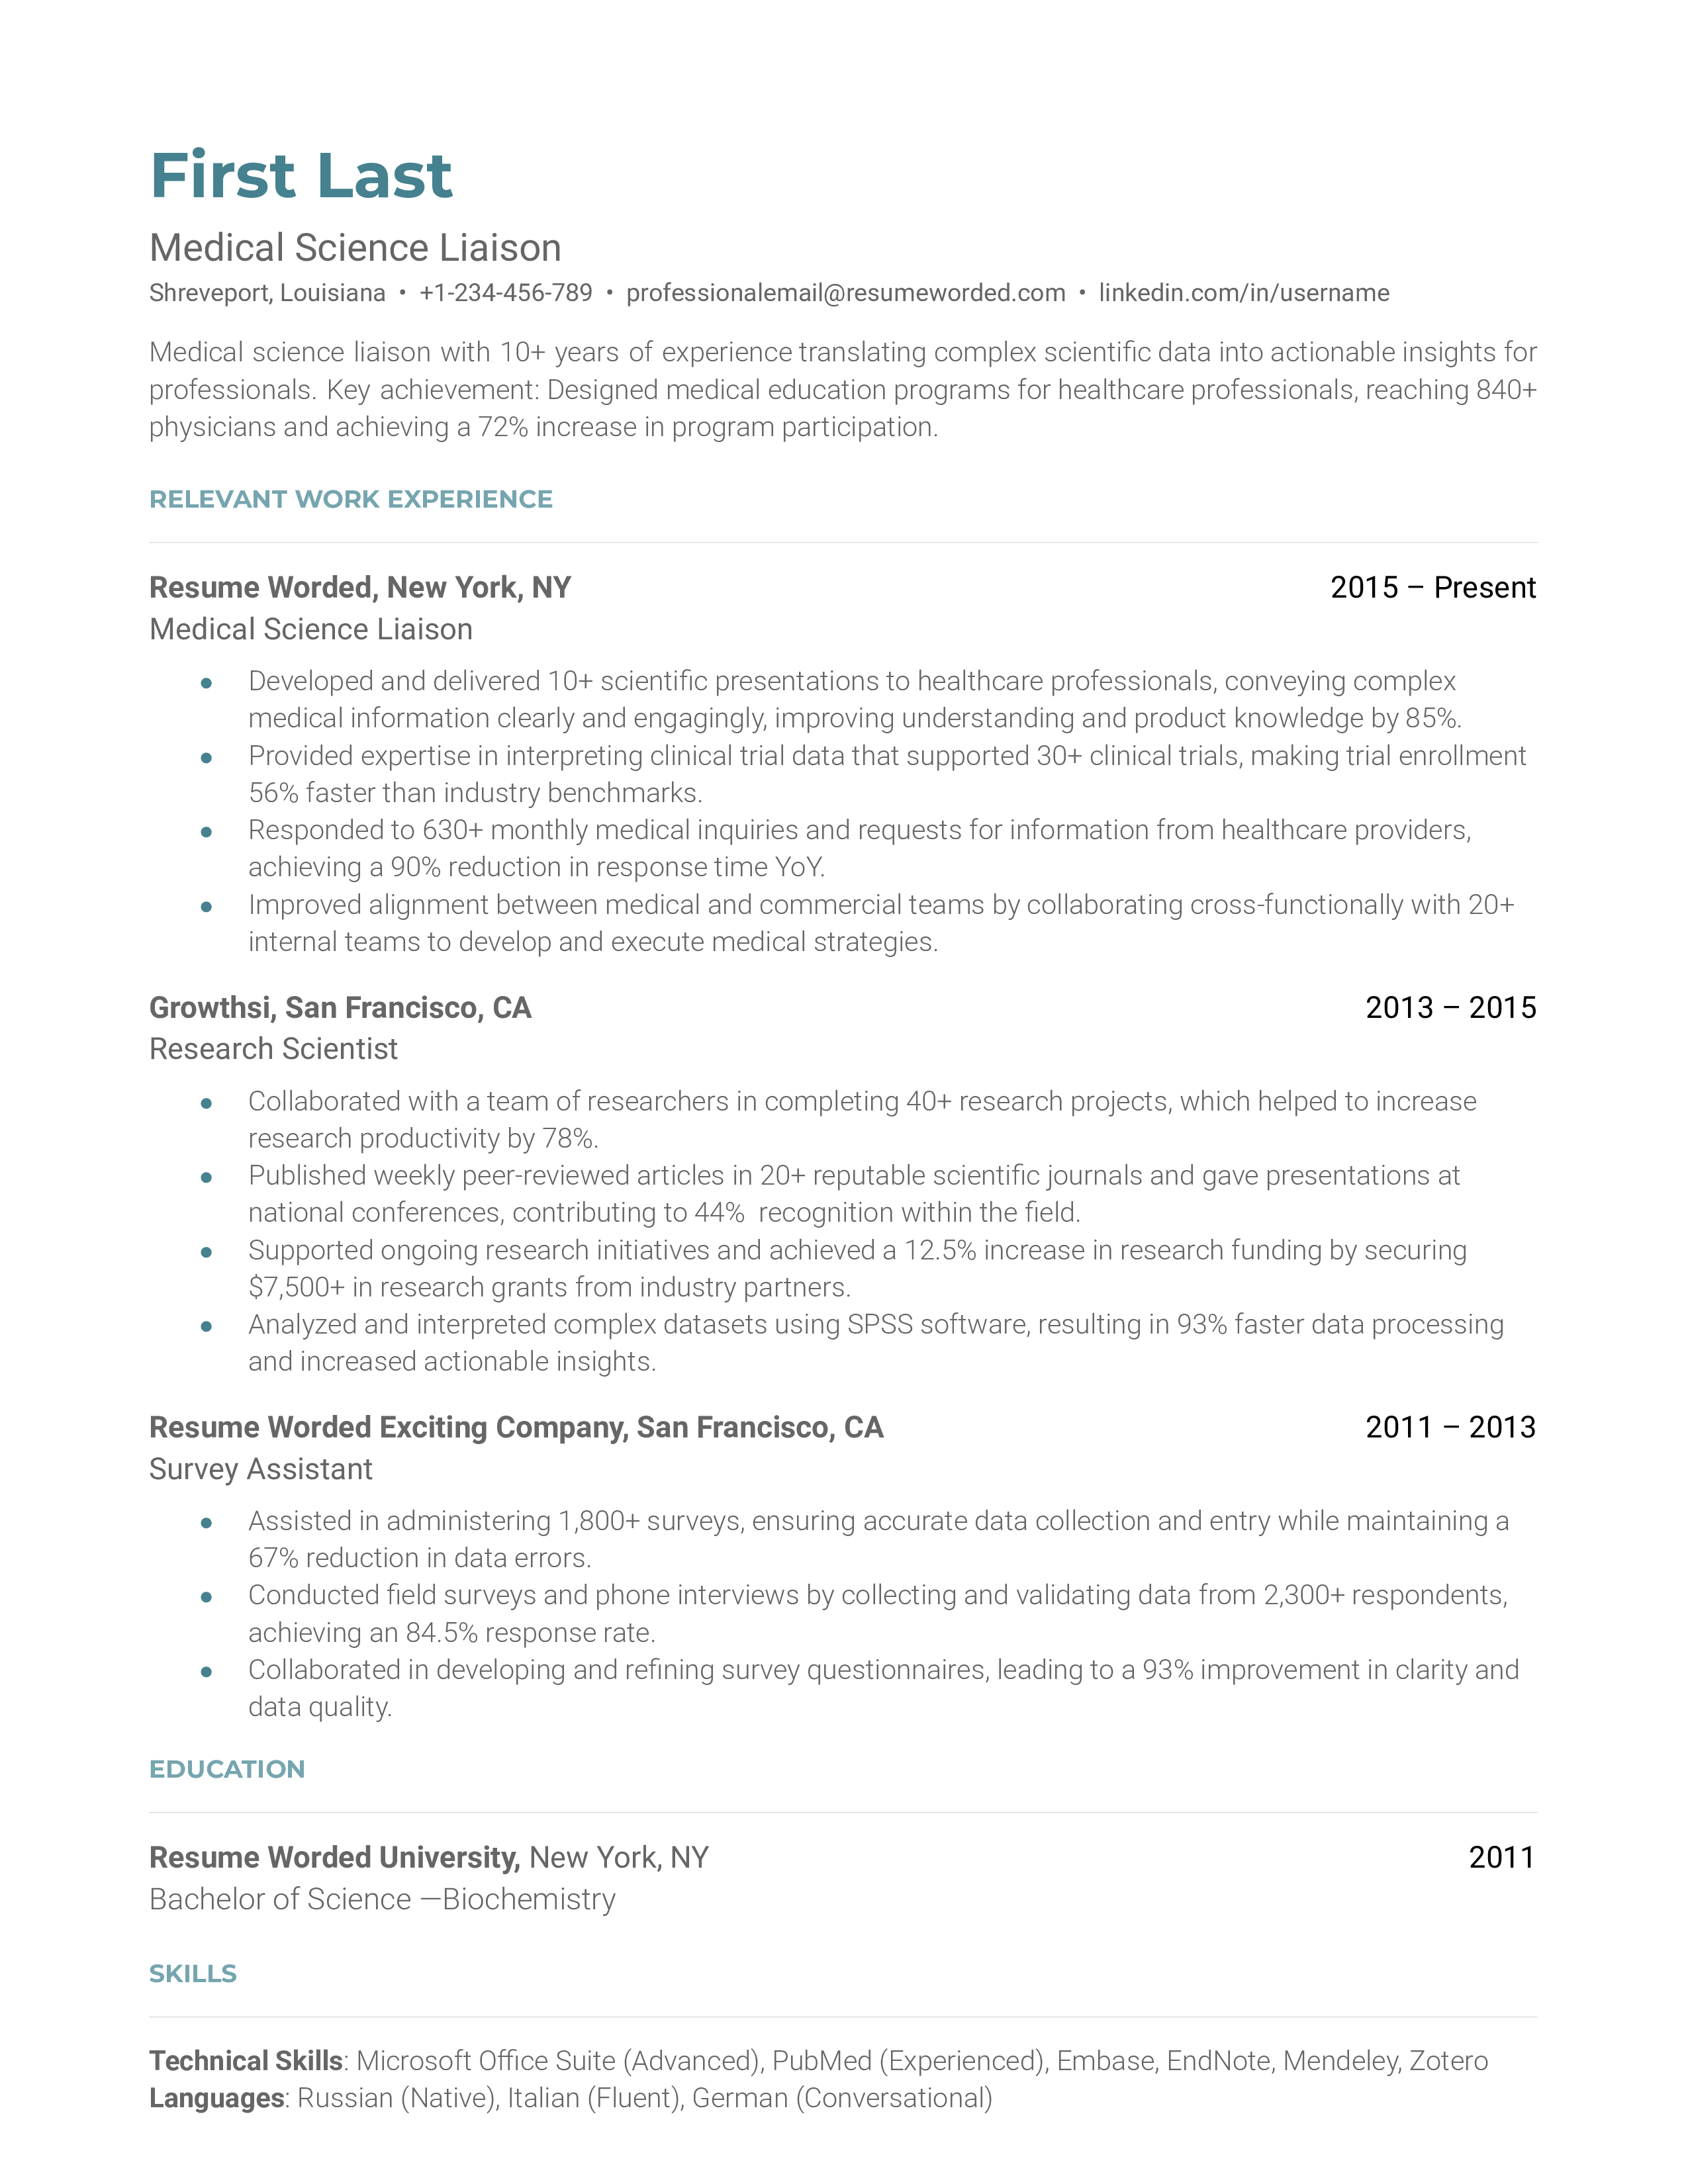 A well-structured MSL resume highlighting scientific knowledge and relationship-building experience.